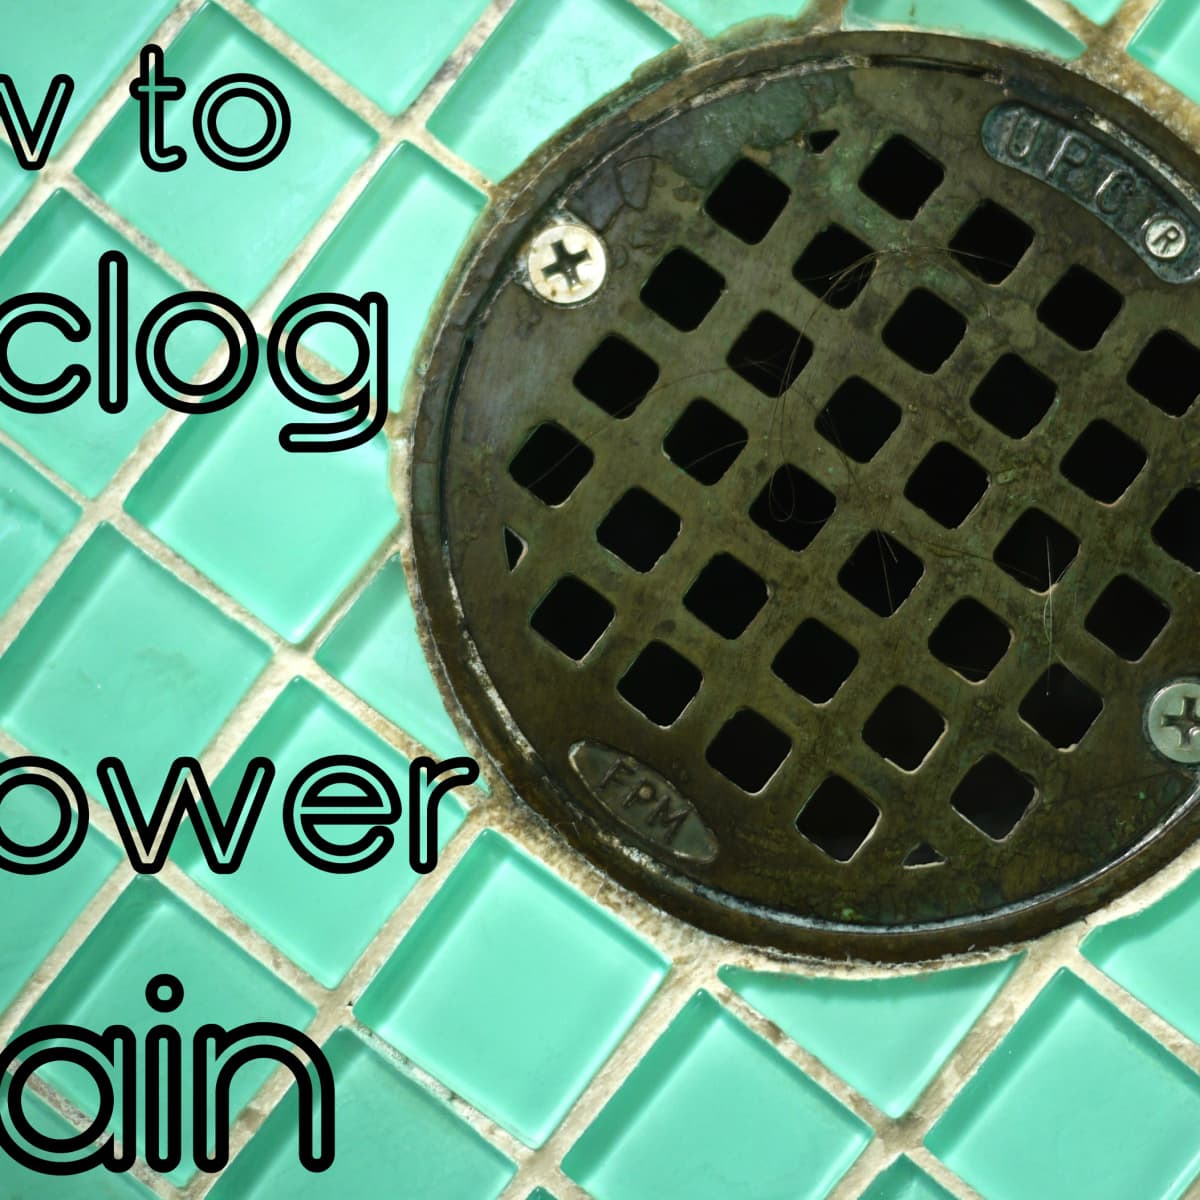 How To Clear A Clogged Shower Drain 8, What Can I Use To Unclog My Bathtub Drain